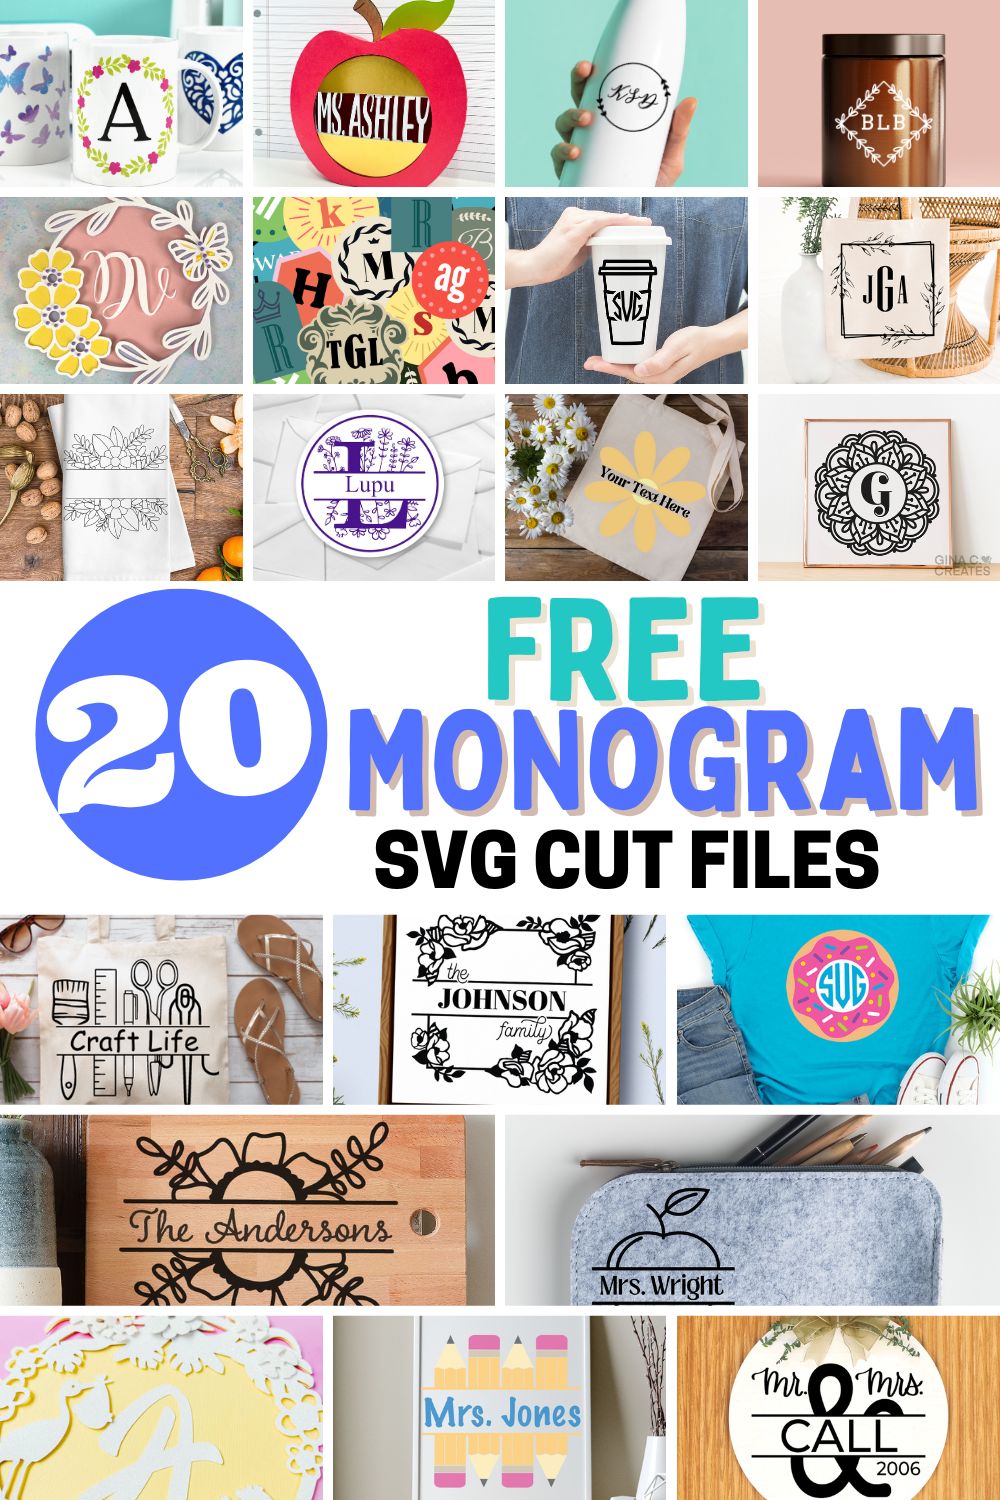 Free Monogram designs for crafting with Cricut and Silhouette